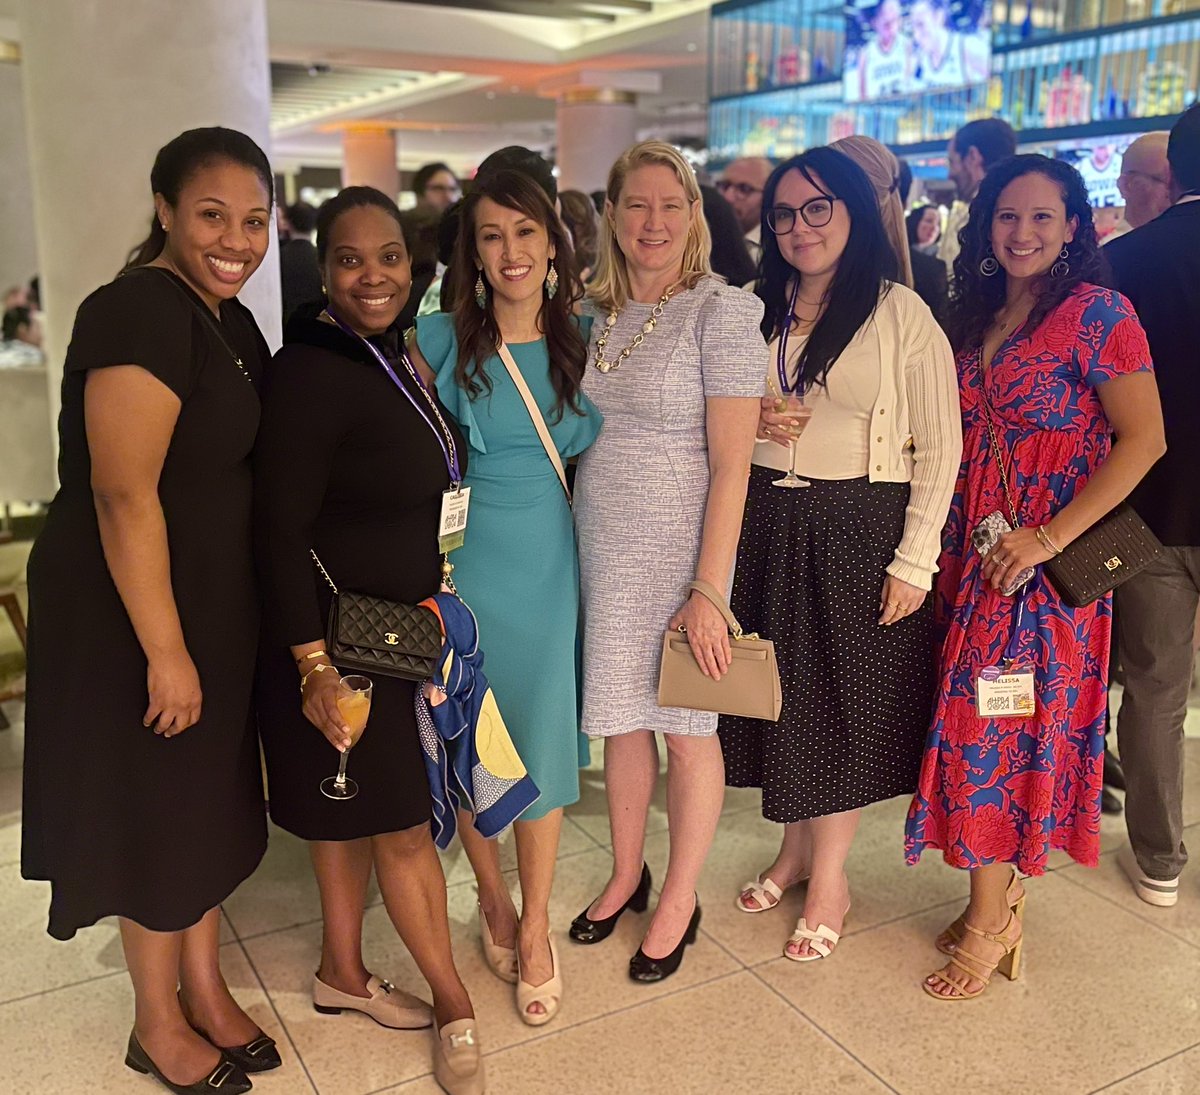 That’s right! Another #HPBHeroine photo coming your way from my last night at #AHPBA2024. Love seeing them all in person. @AHPBA Thank you @AnishJayJain for the awesome photo.